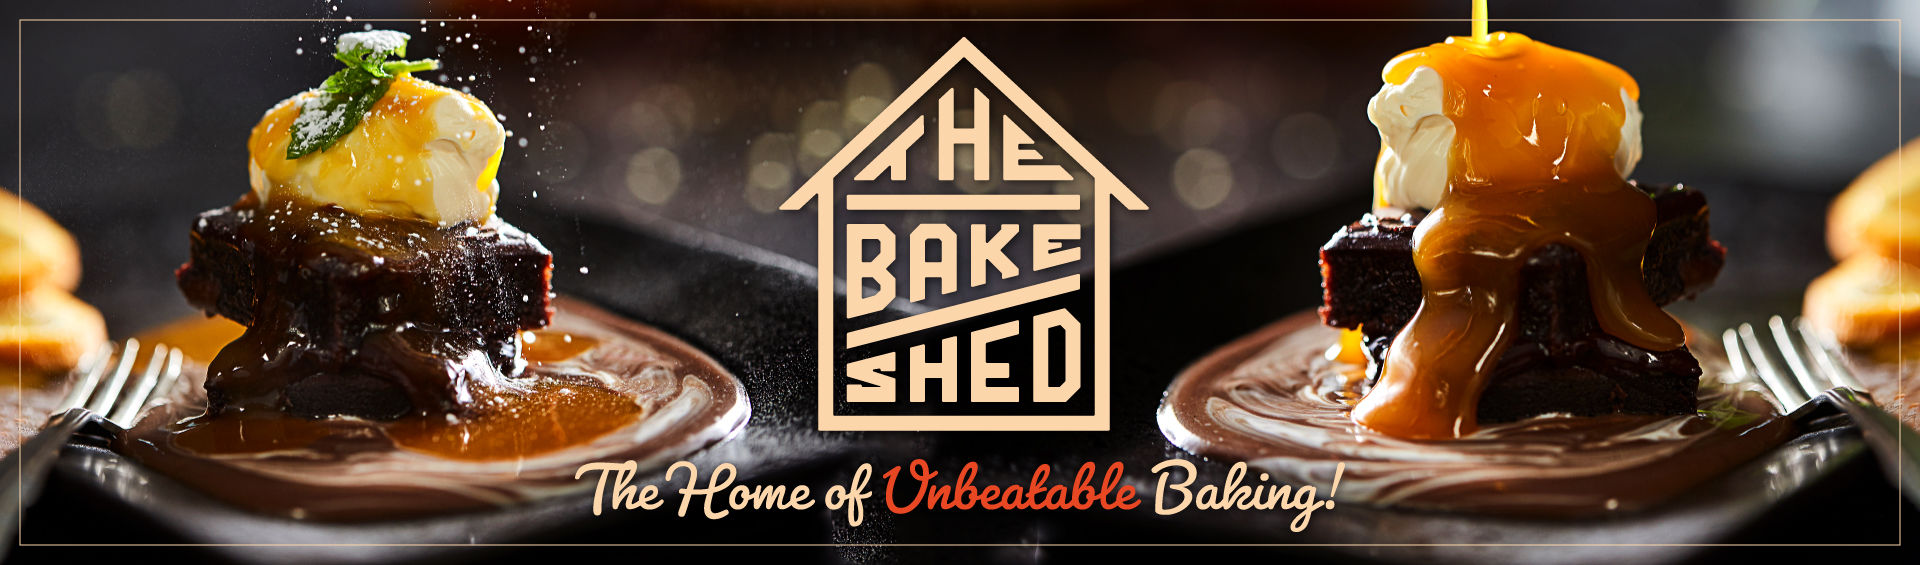 The Bake Shed Brand Page